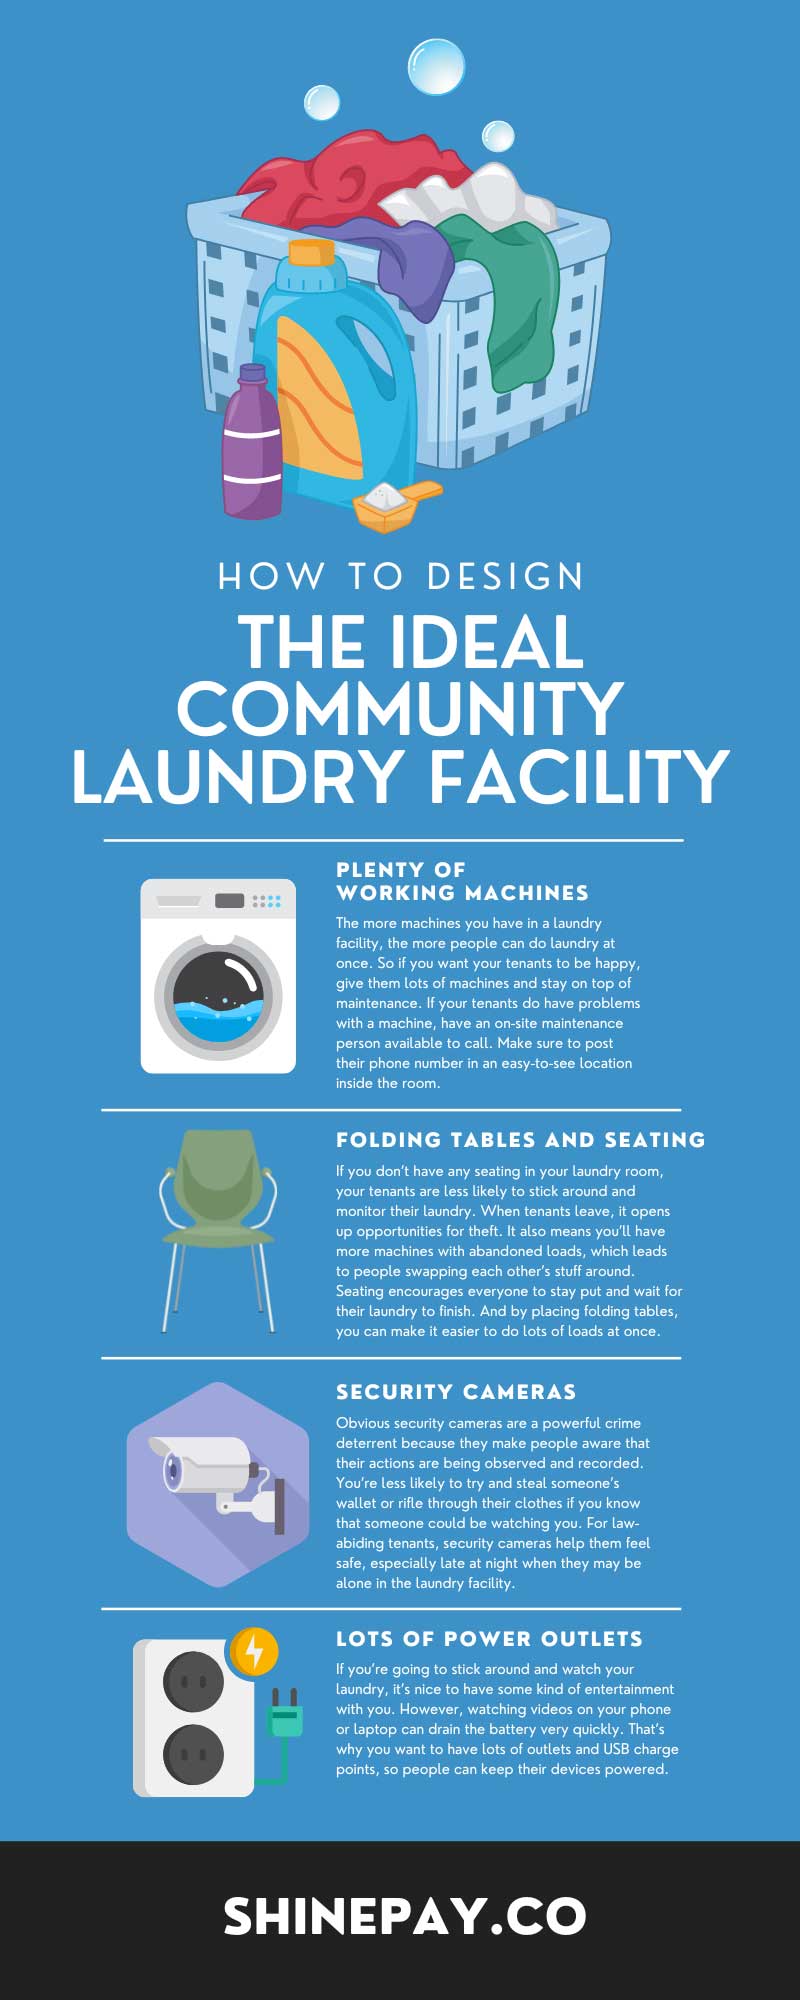 How To Design the Ideal Community Laundry Facility
